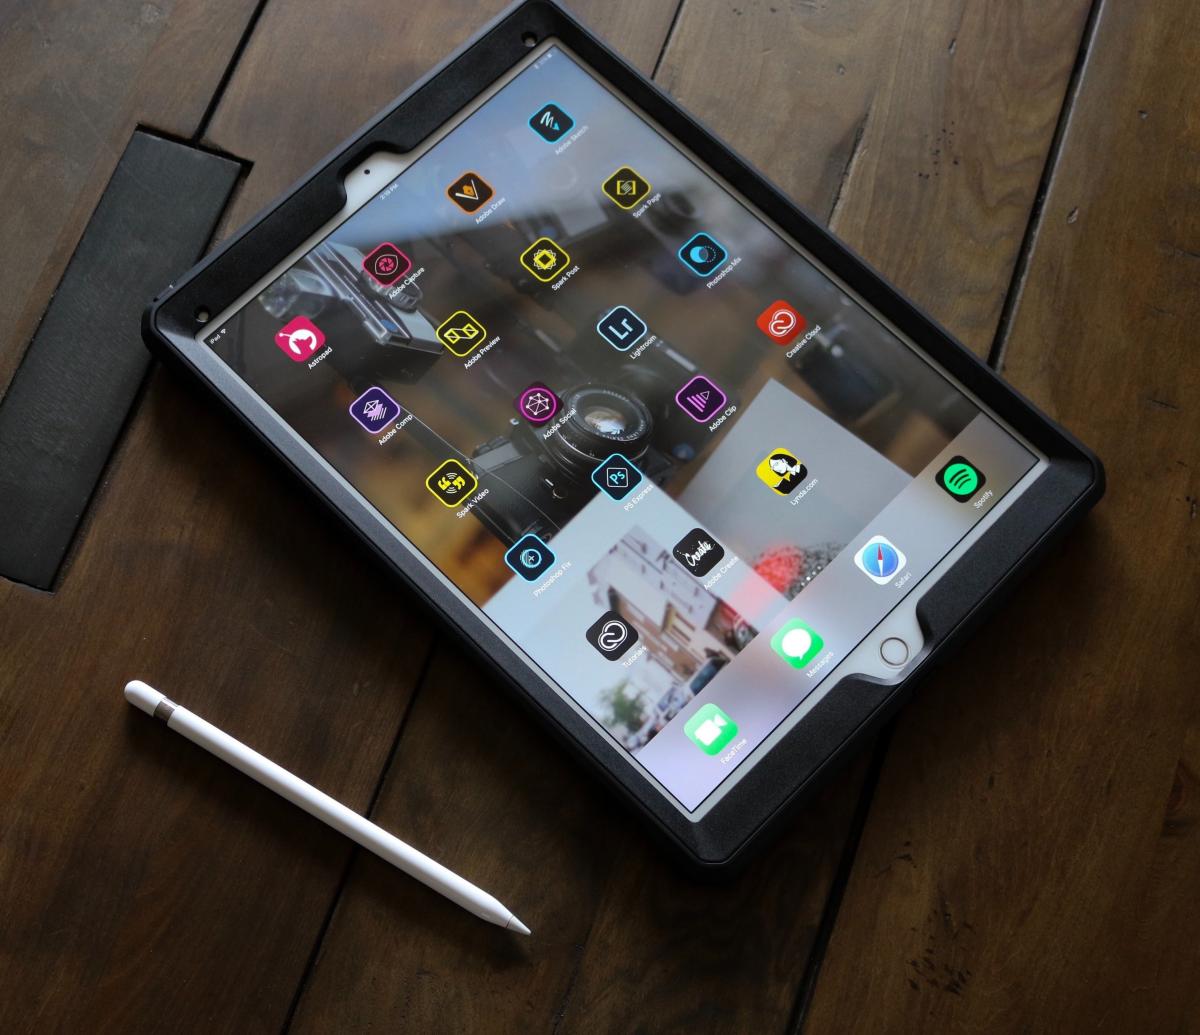 Electronic tablet